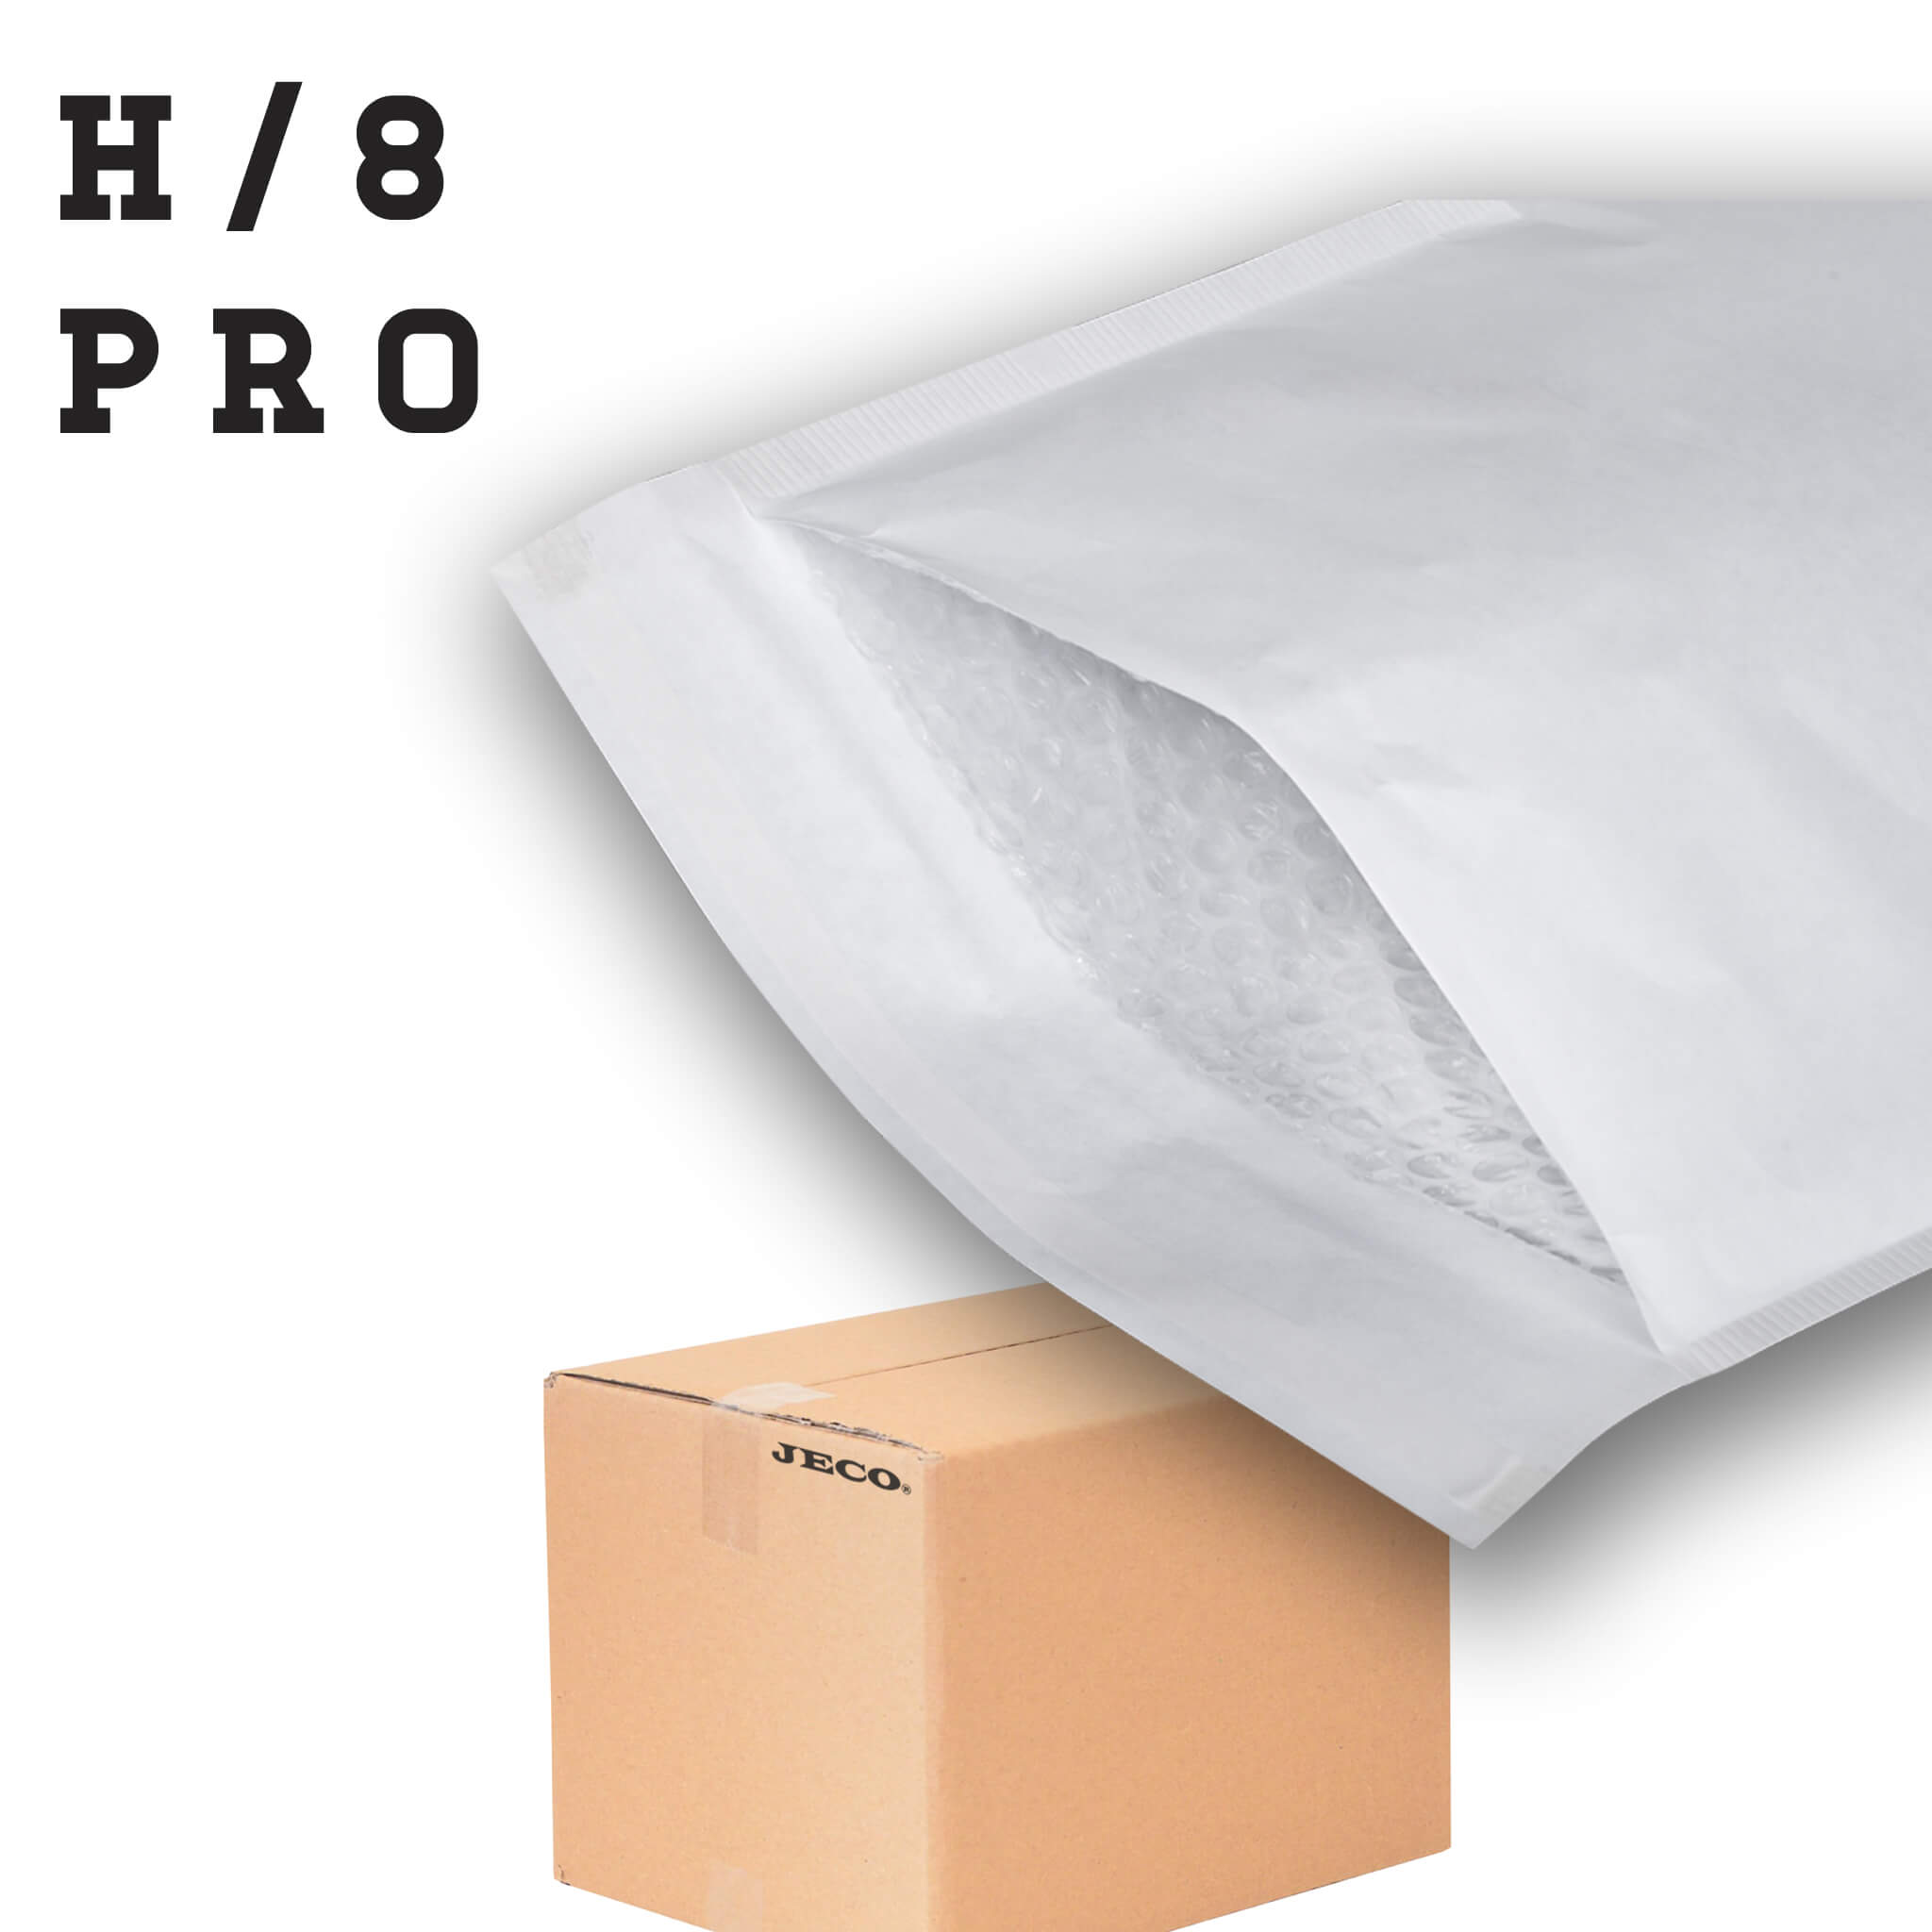 Enveloppe bulle Mail Lite JoviMail® blanche taille H/5 - 270x360